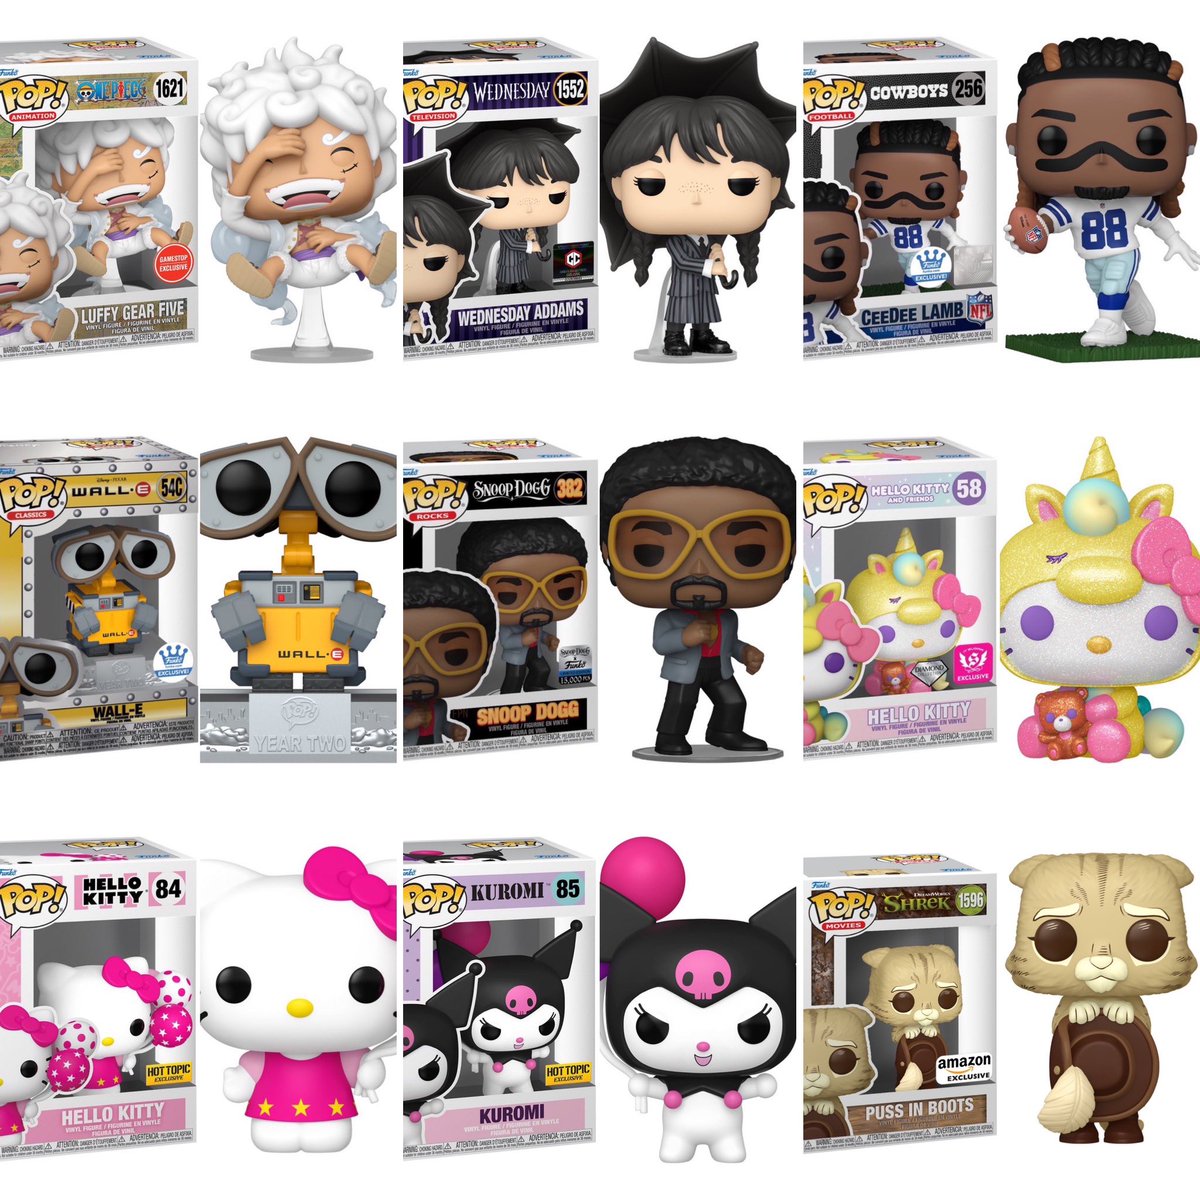 Recap of the new exclusive reveals! Make sure you have notifications on so you don’t miss out! Currently only Puss is live ~
Linky ~ fnkpp.com/AmPuss
#Ad #FPN #FunkoPOPNews #Funko #POP #POPVinyl #FunkoPOP #FunkoSoda